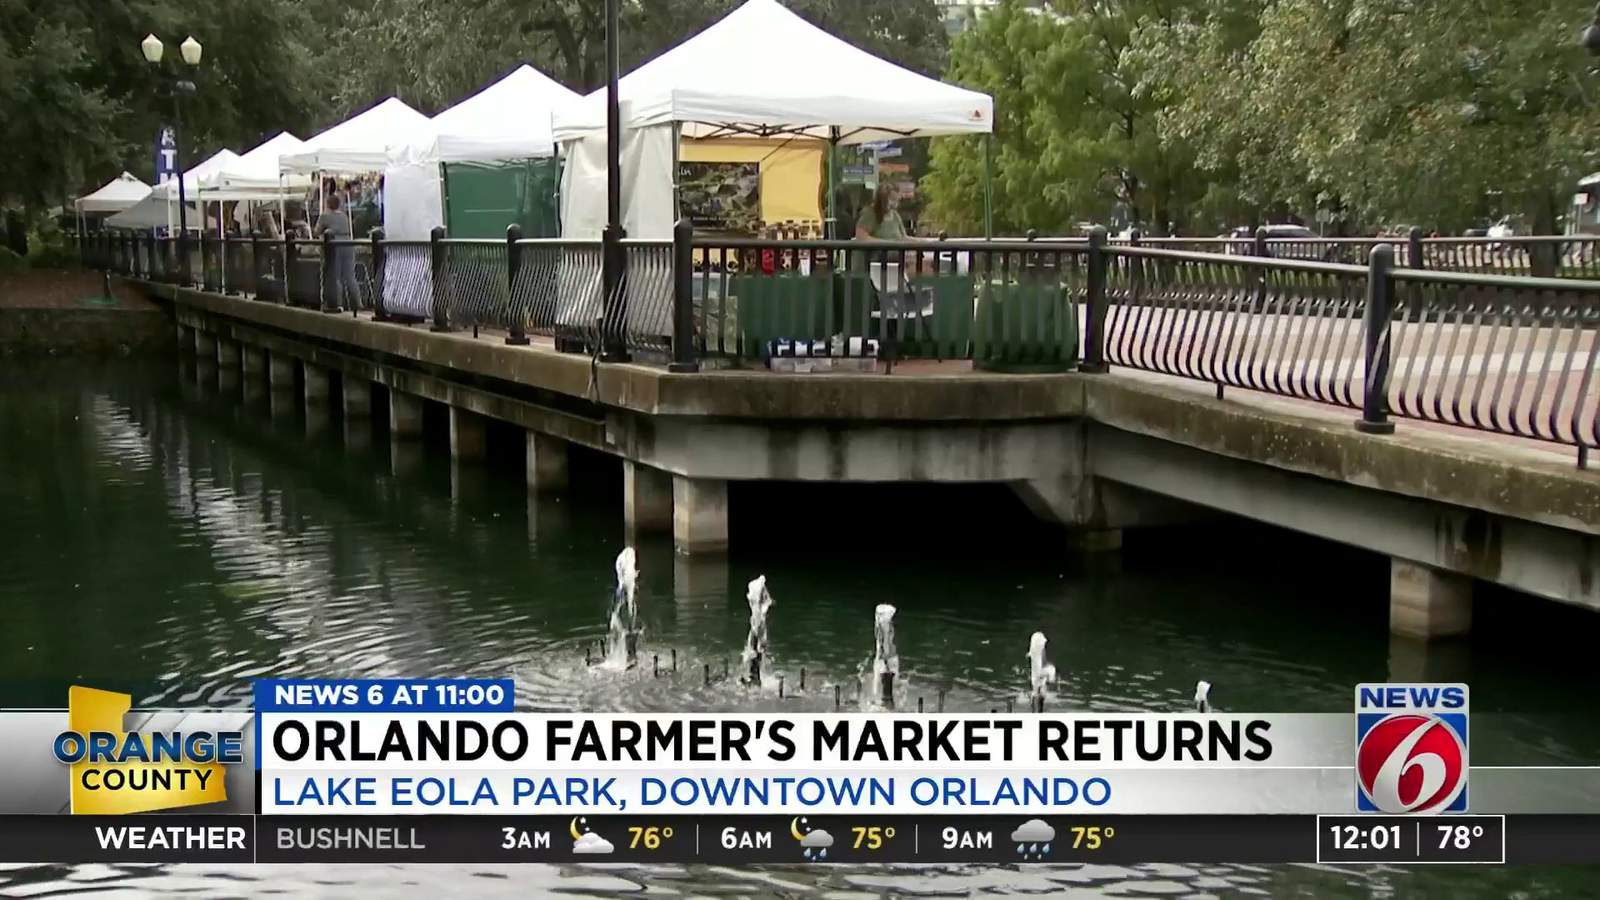 ‘I’m back!’ Vendors, shoppers excited about Orlando Farmer’s Market reopening